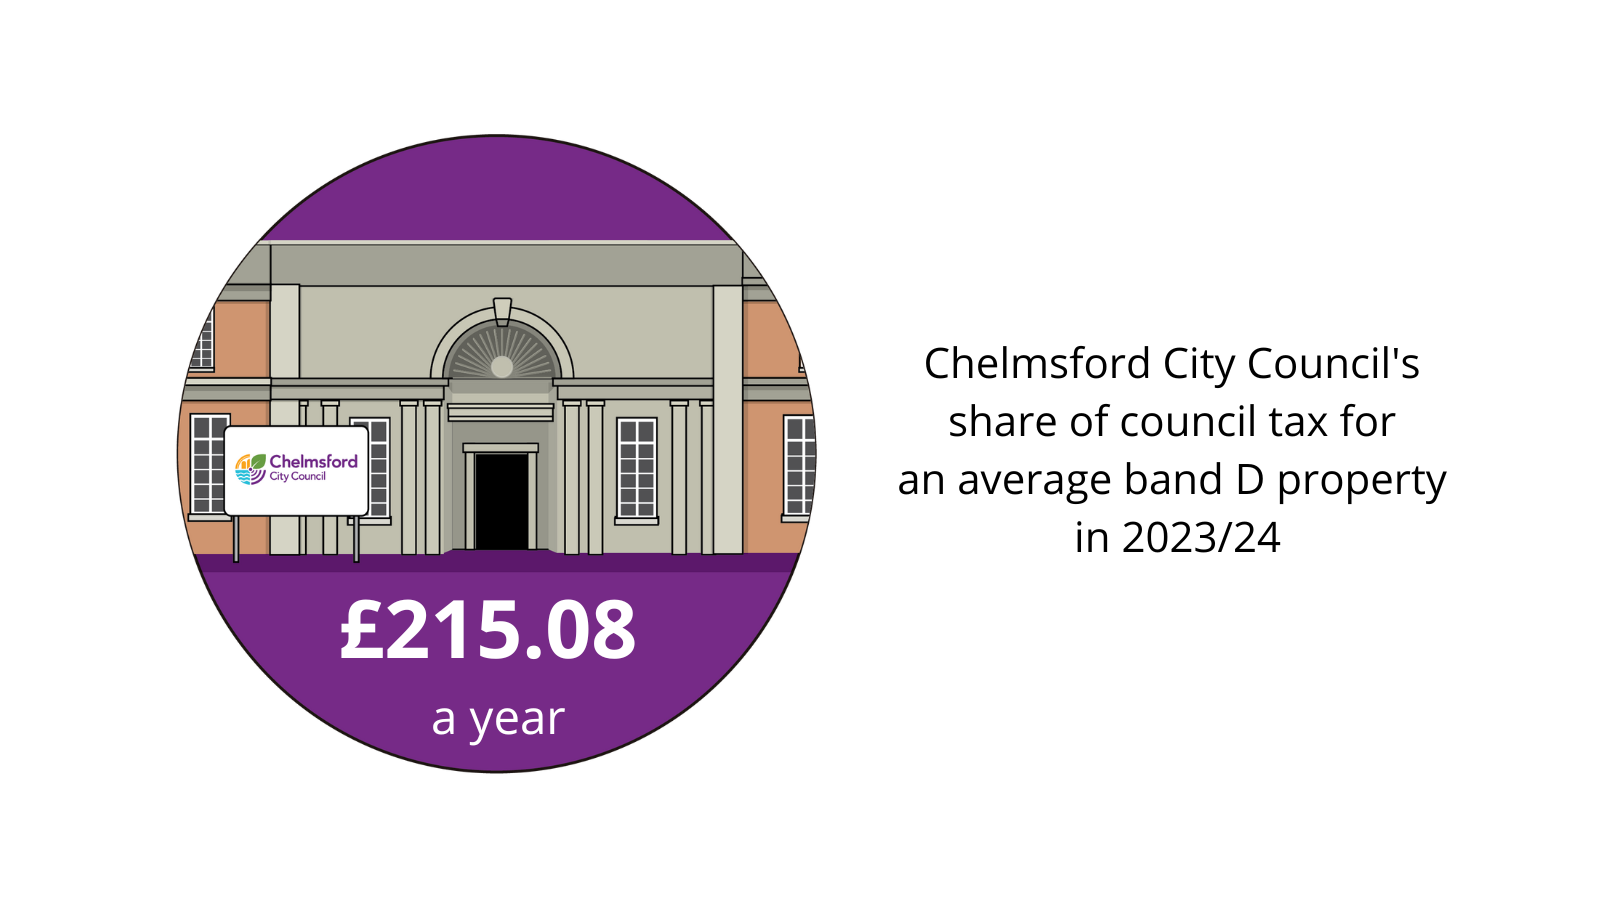 Council tax per year from band D property